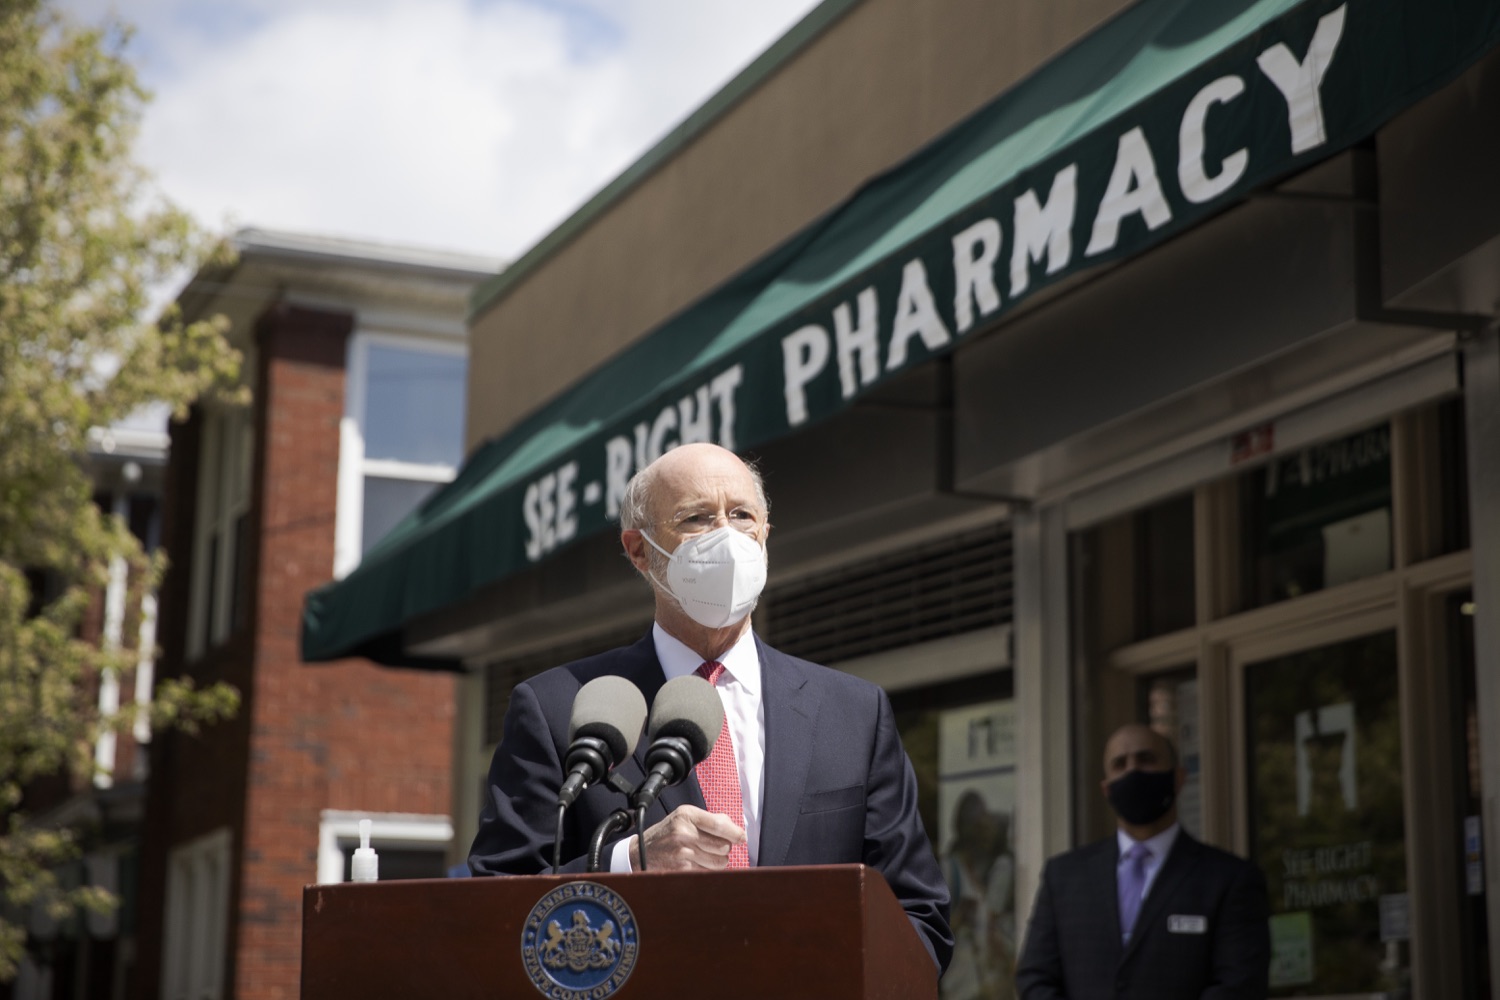 Pennsylvania Governor Tom Wolf speaking with the press.  Governor Tom Wolf today visited See-Right Pharmacy in Harrisburg to learn more about how the local, neighborhood pharmacy is vaccinating community members and to talk about COVID-19 vaccine hesitancy in Pennsylvania. Harrisburg, PA  April 22, 2021<br><a href="https://filesource.amperwave.net/commonwealthofpa/photo/18704_gov_seeRight_dz_014.jpg" target="_blank">⇣ Download Photo</a>